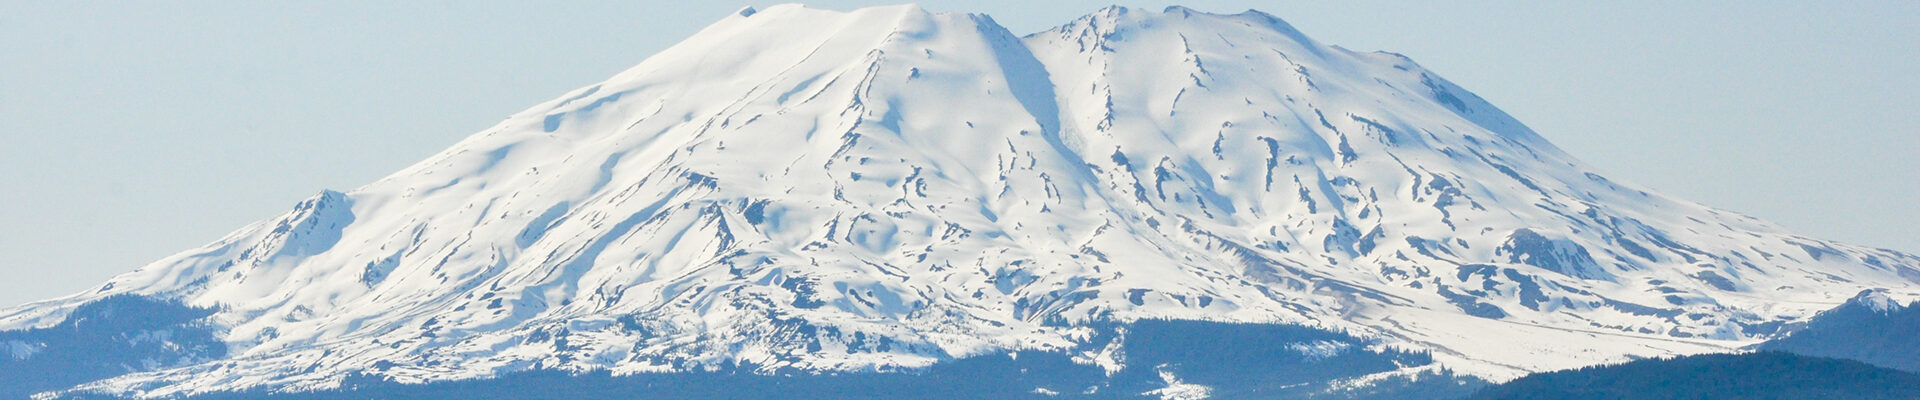 Mt St Helens covered in snow